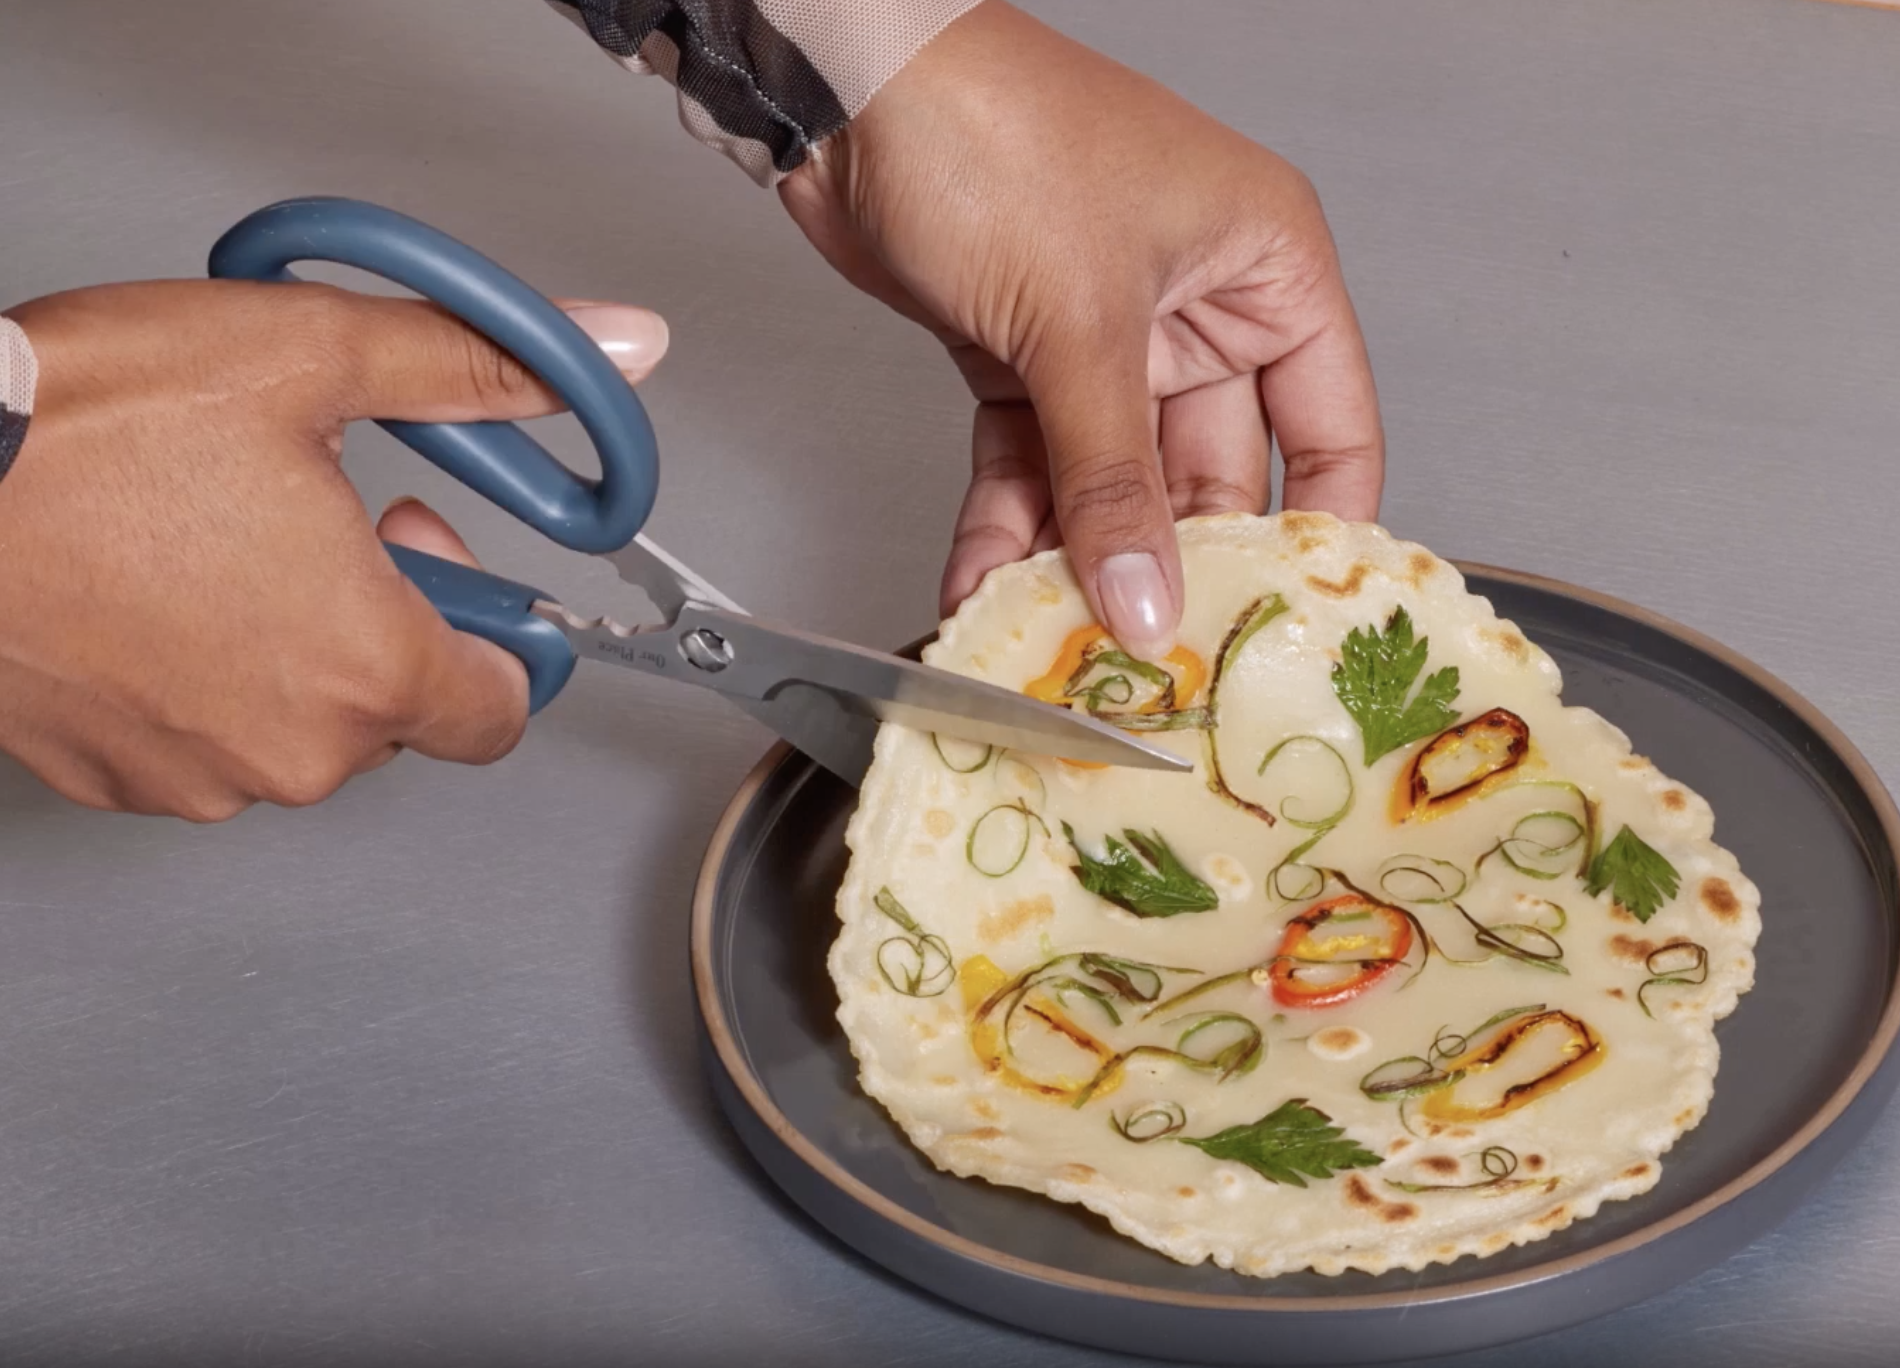 A person cutting a veggie pancake with the scissors